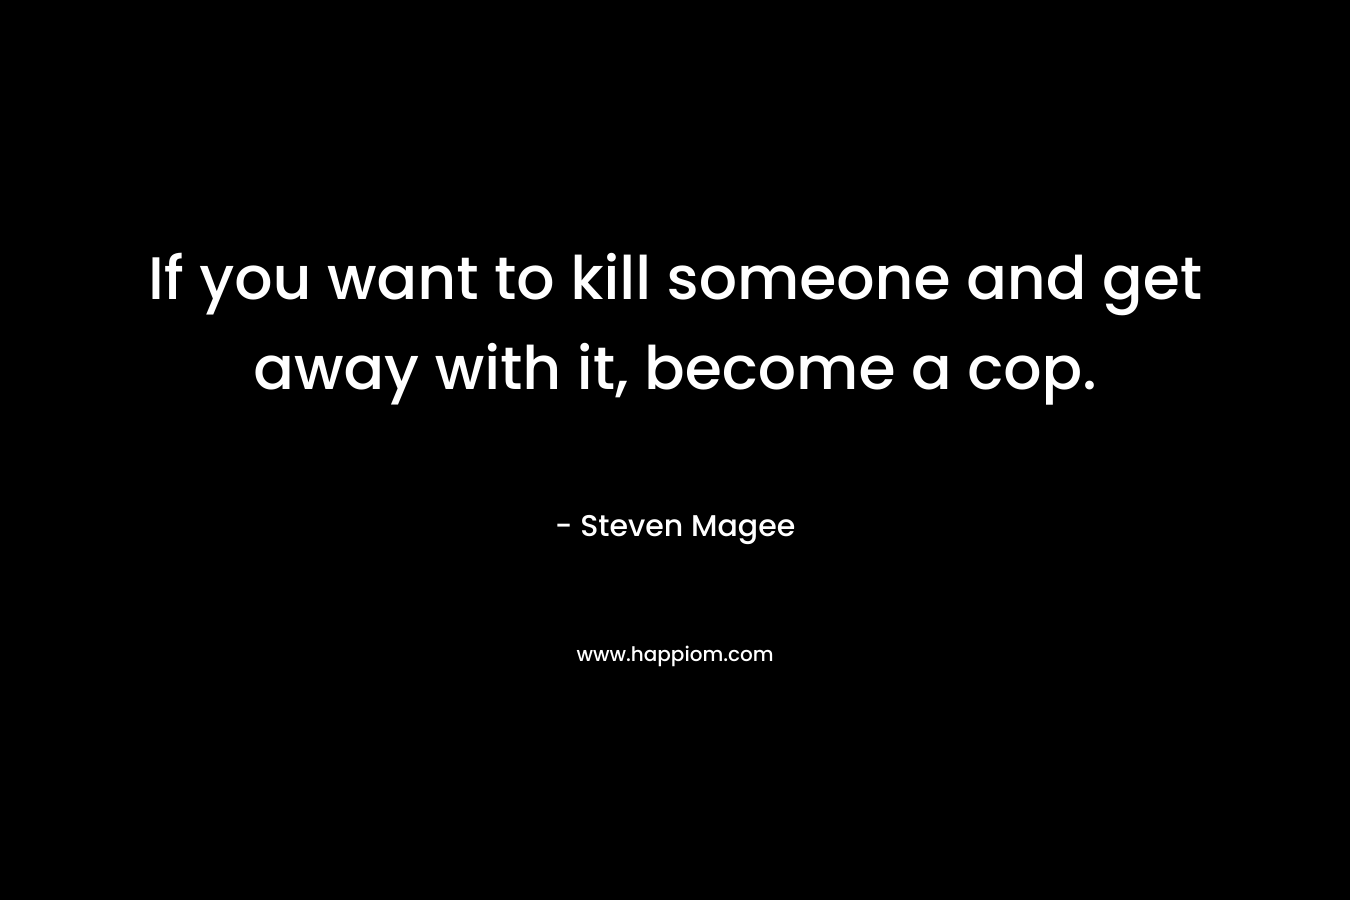 If you want to kill someone and get away with it, become a cop. – Steven Magee